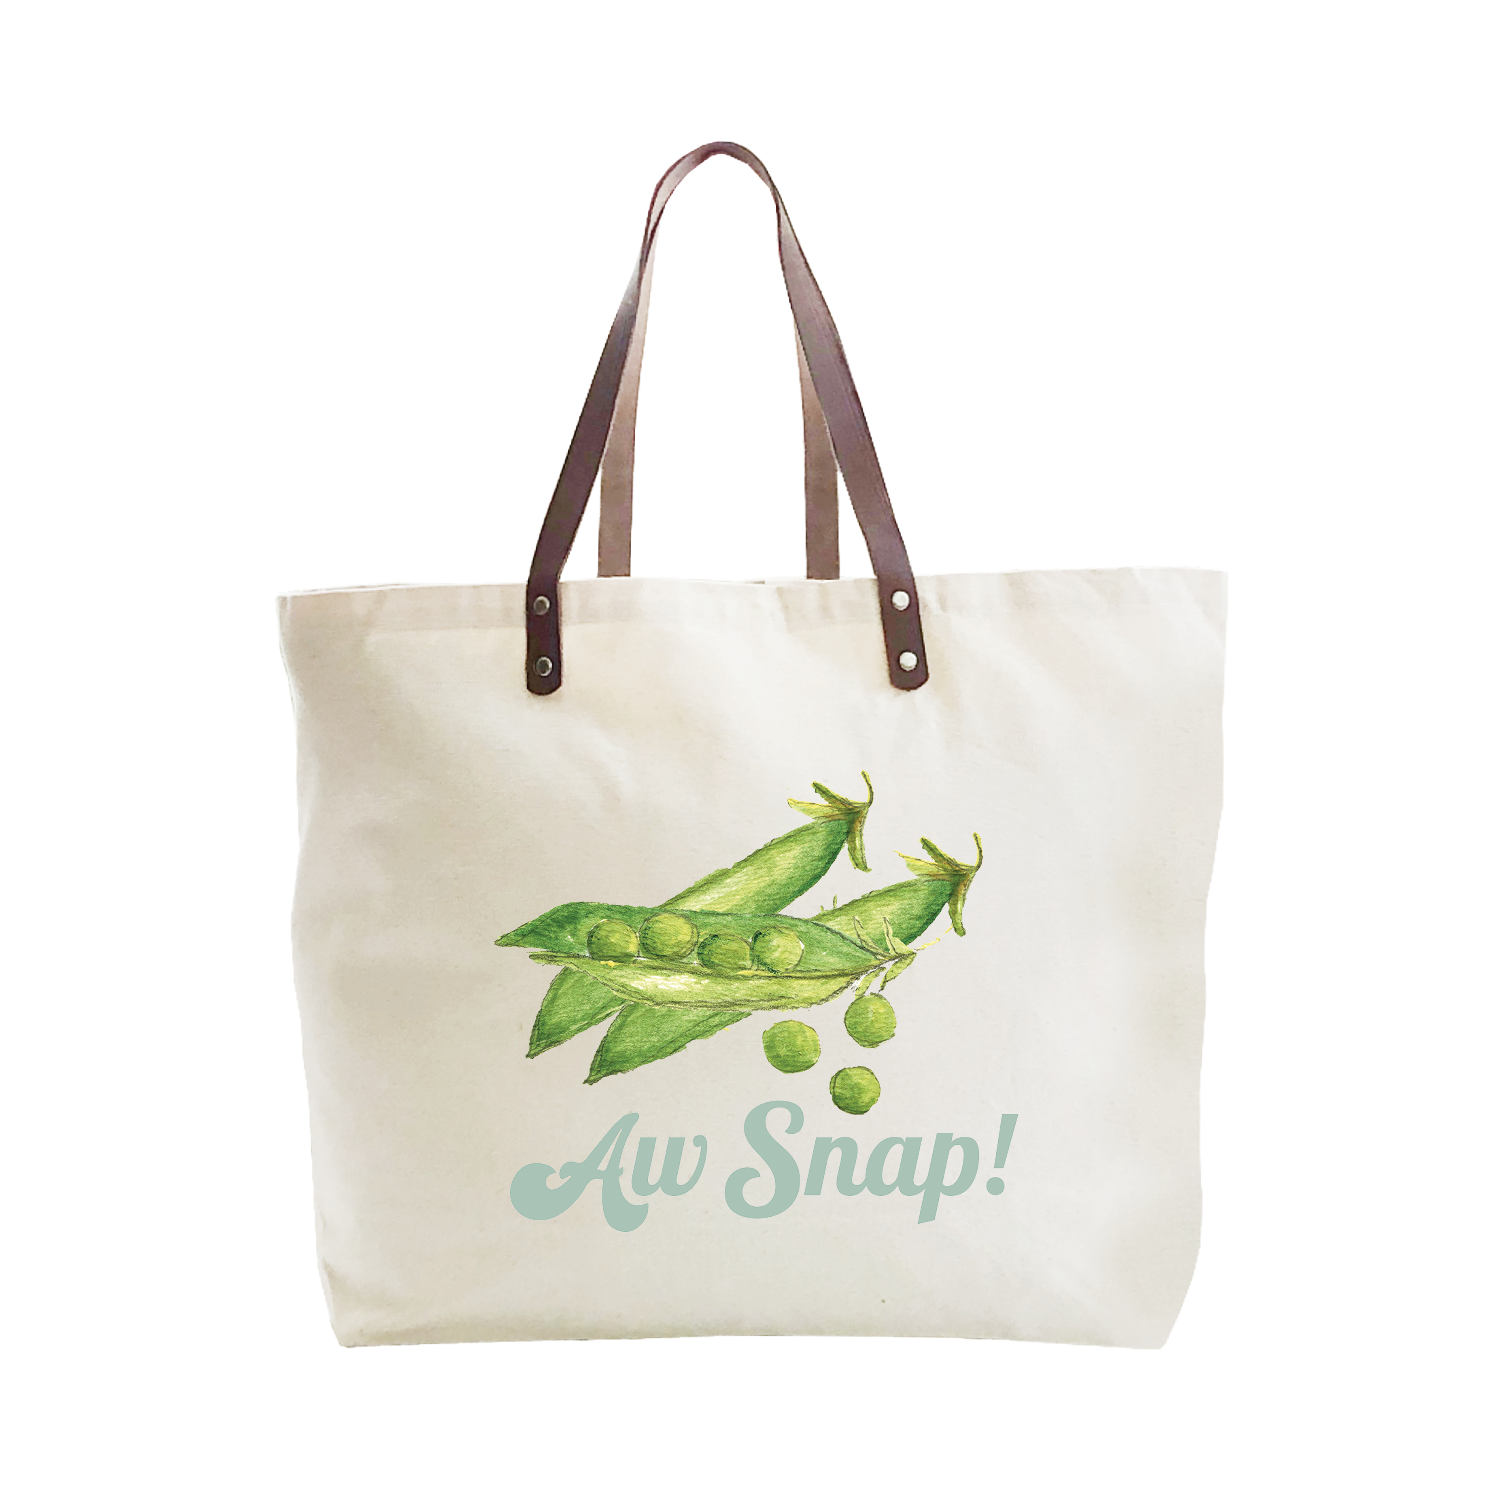 aw snap large tote